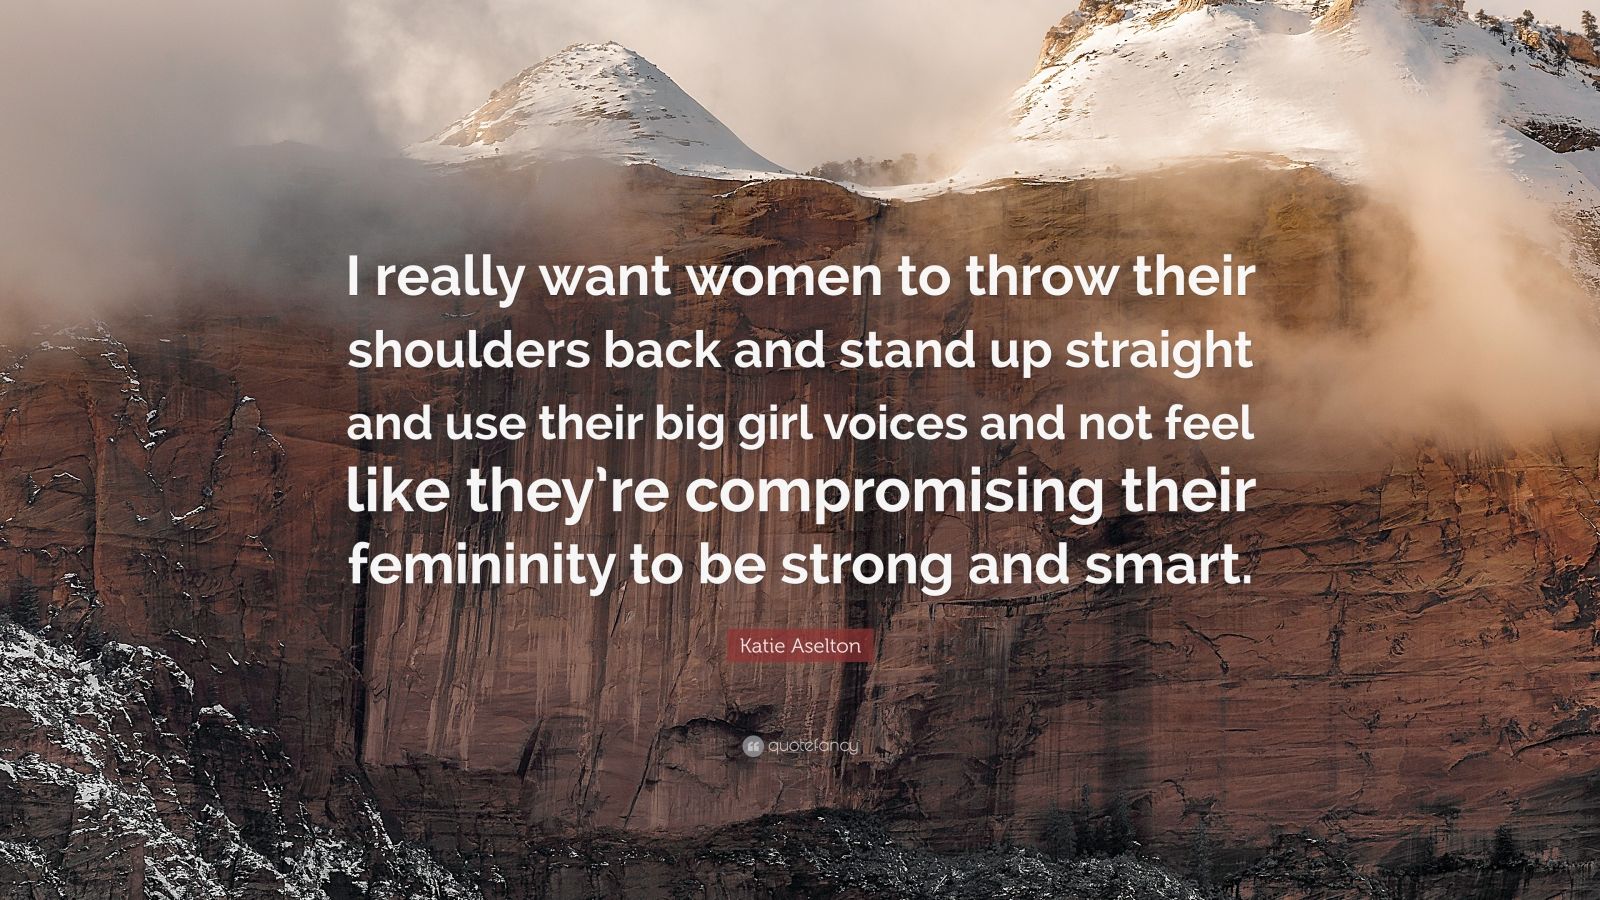 Katie Aselton Quote: “I really want women to throw their shoulders back ...